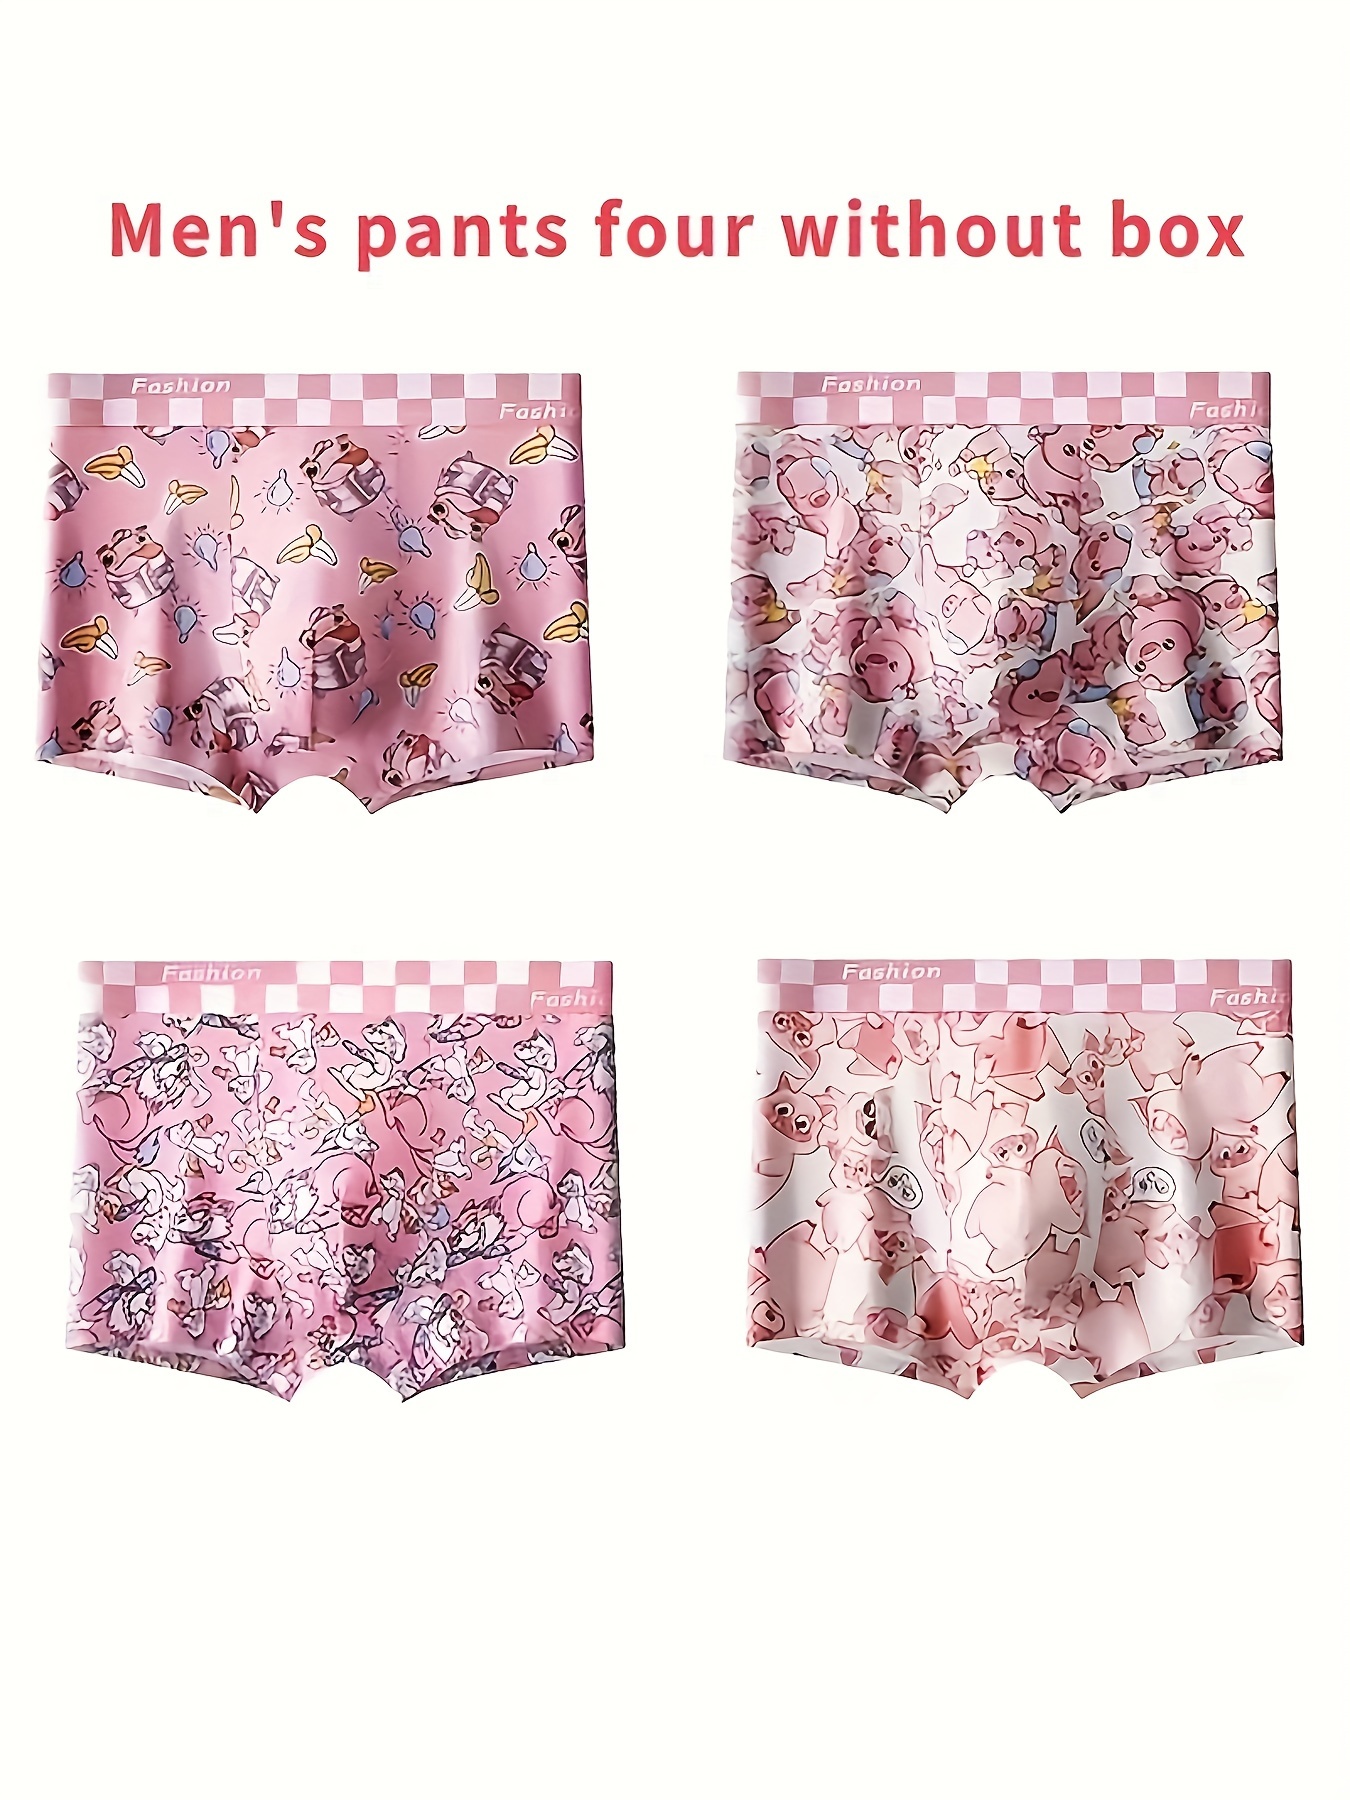 Run The Jewels Boxers Custom Photo Boxers Men's Underwear Musical  Instruments Pattern Boxers White